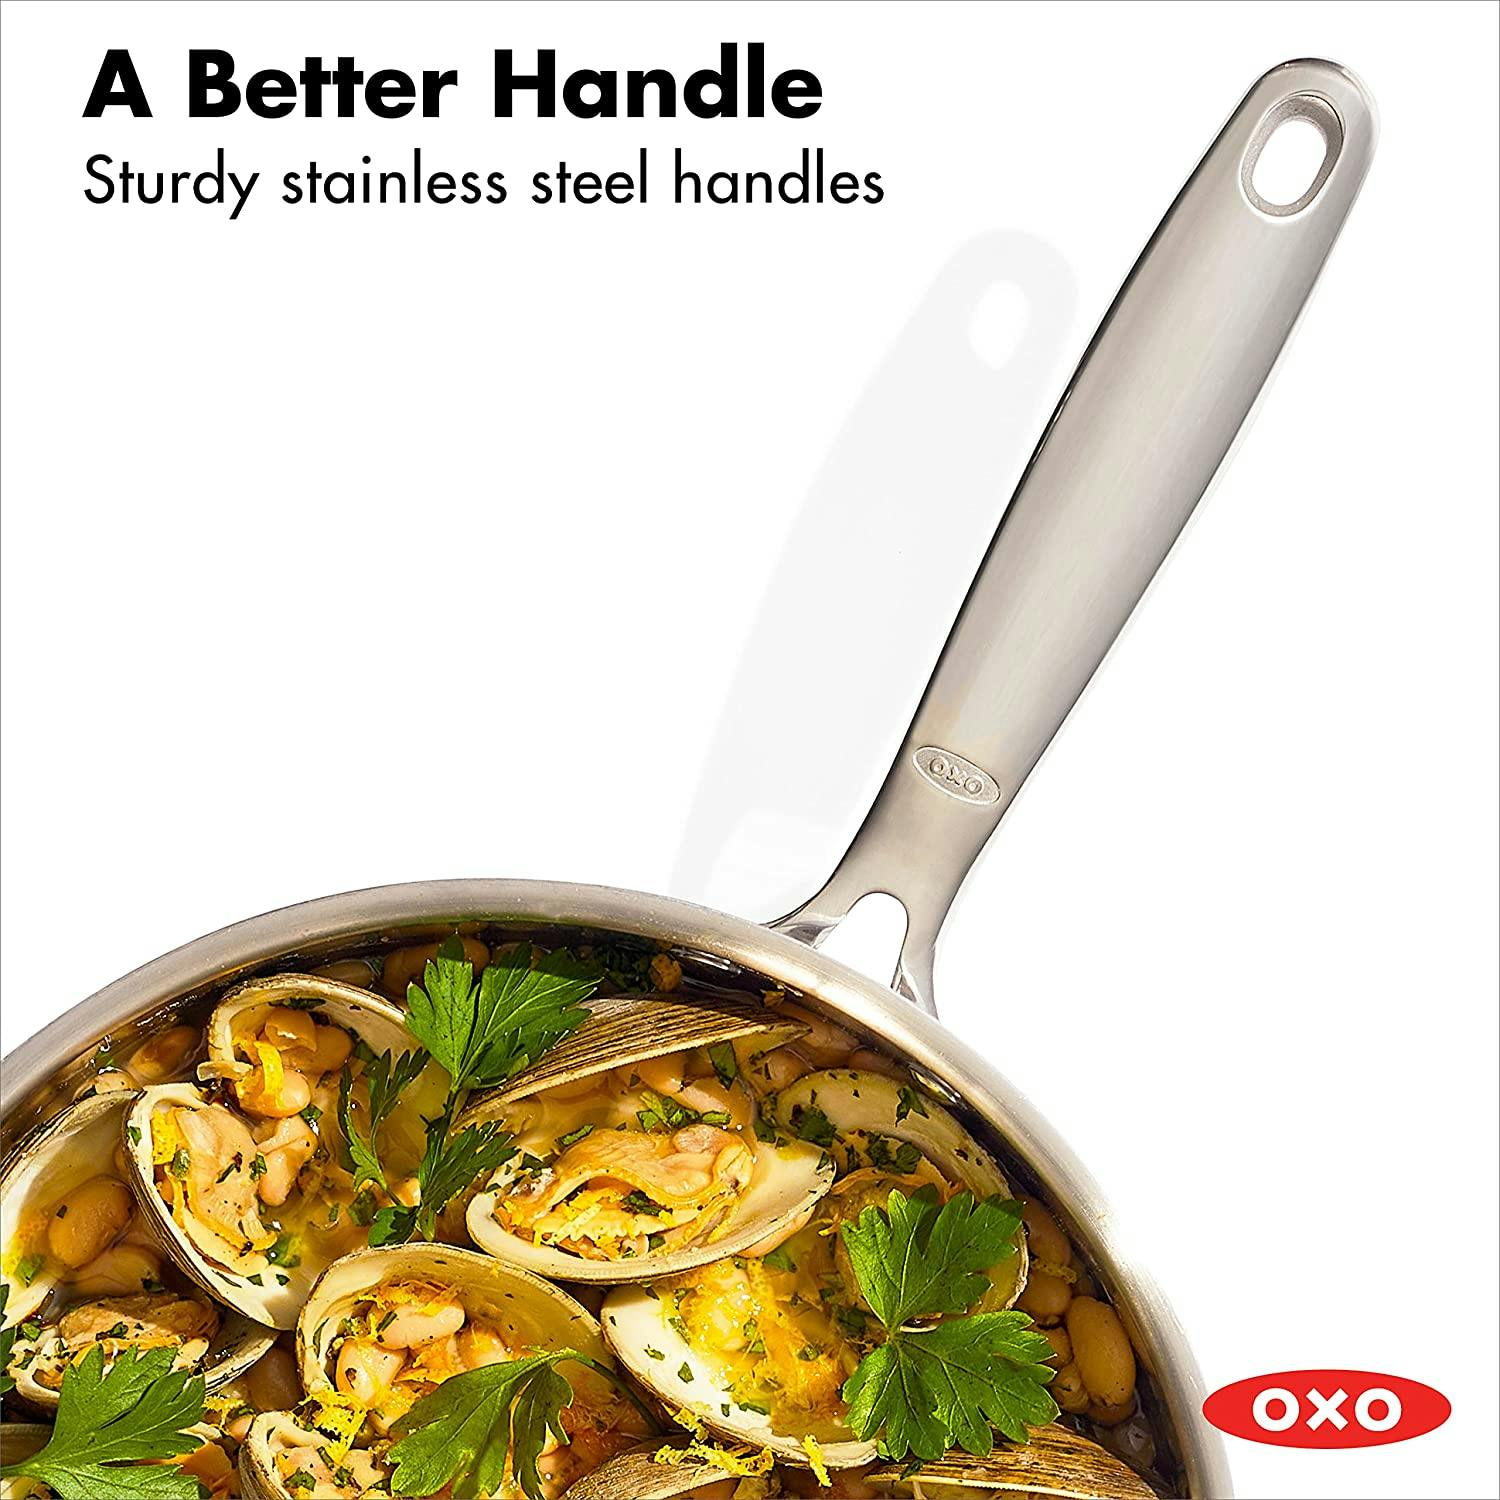 OXO Mira 3-Ply Stainless Steel 2-pc. Frying Pan